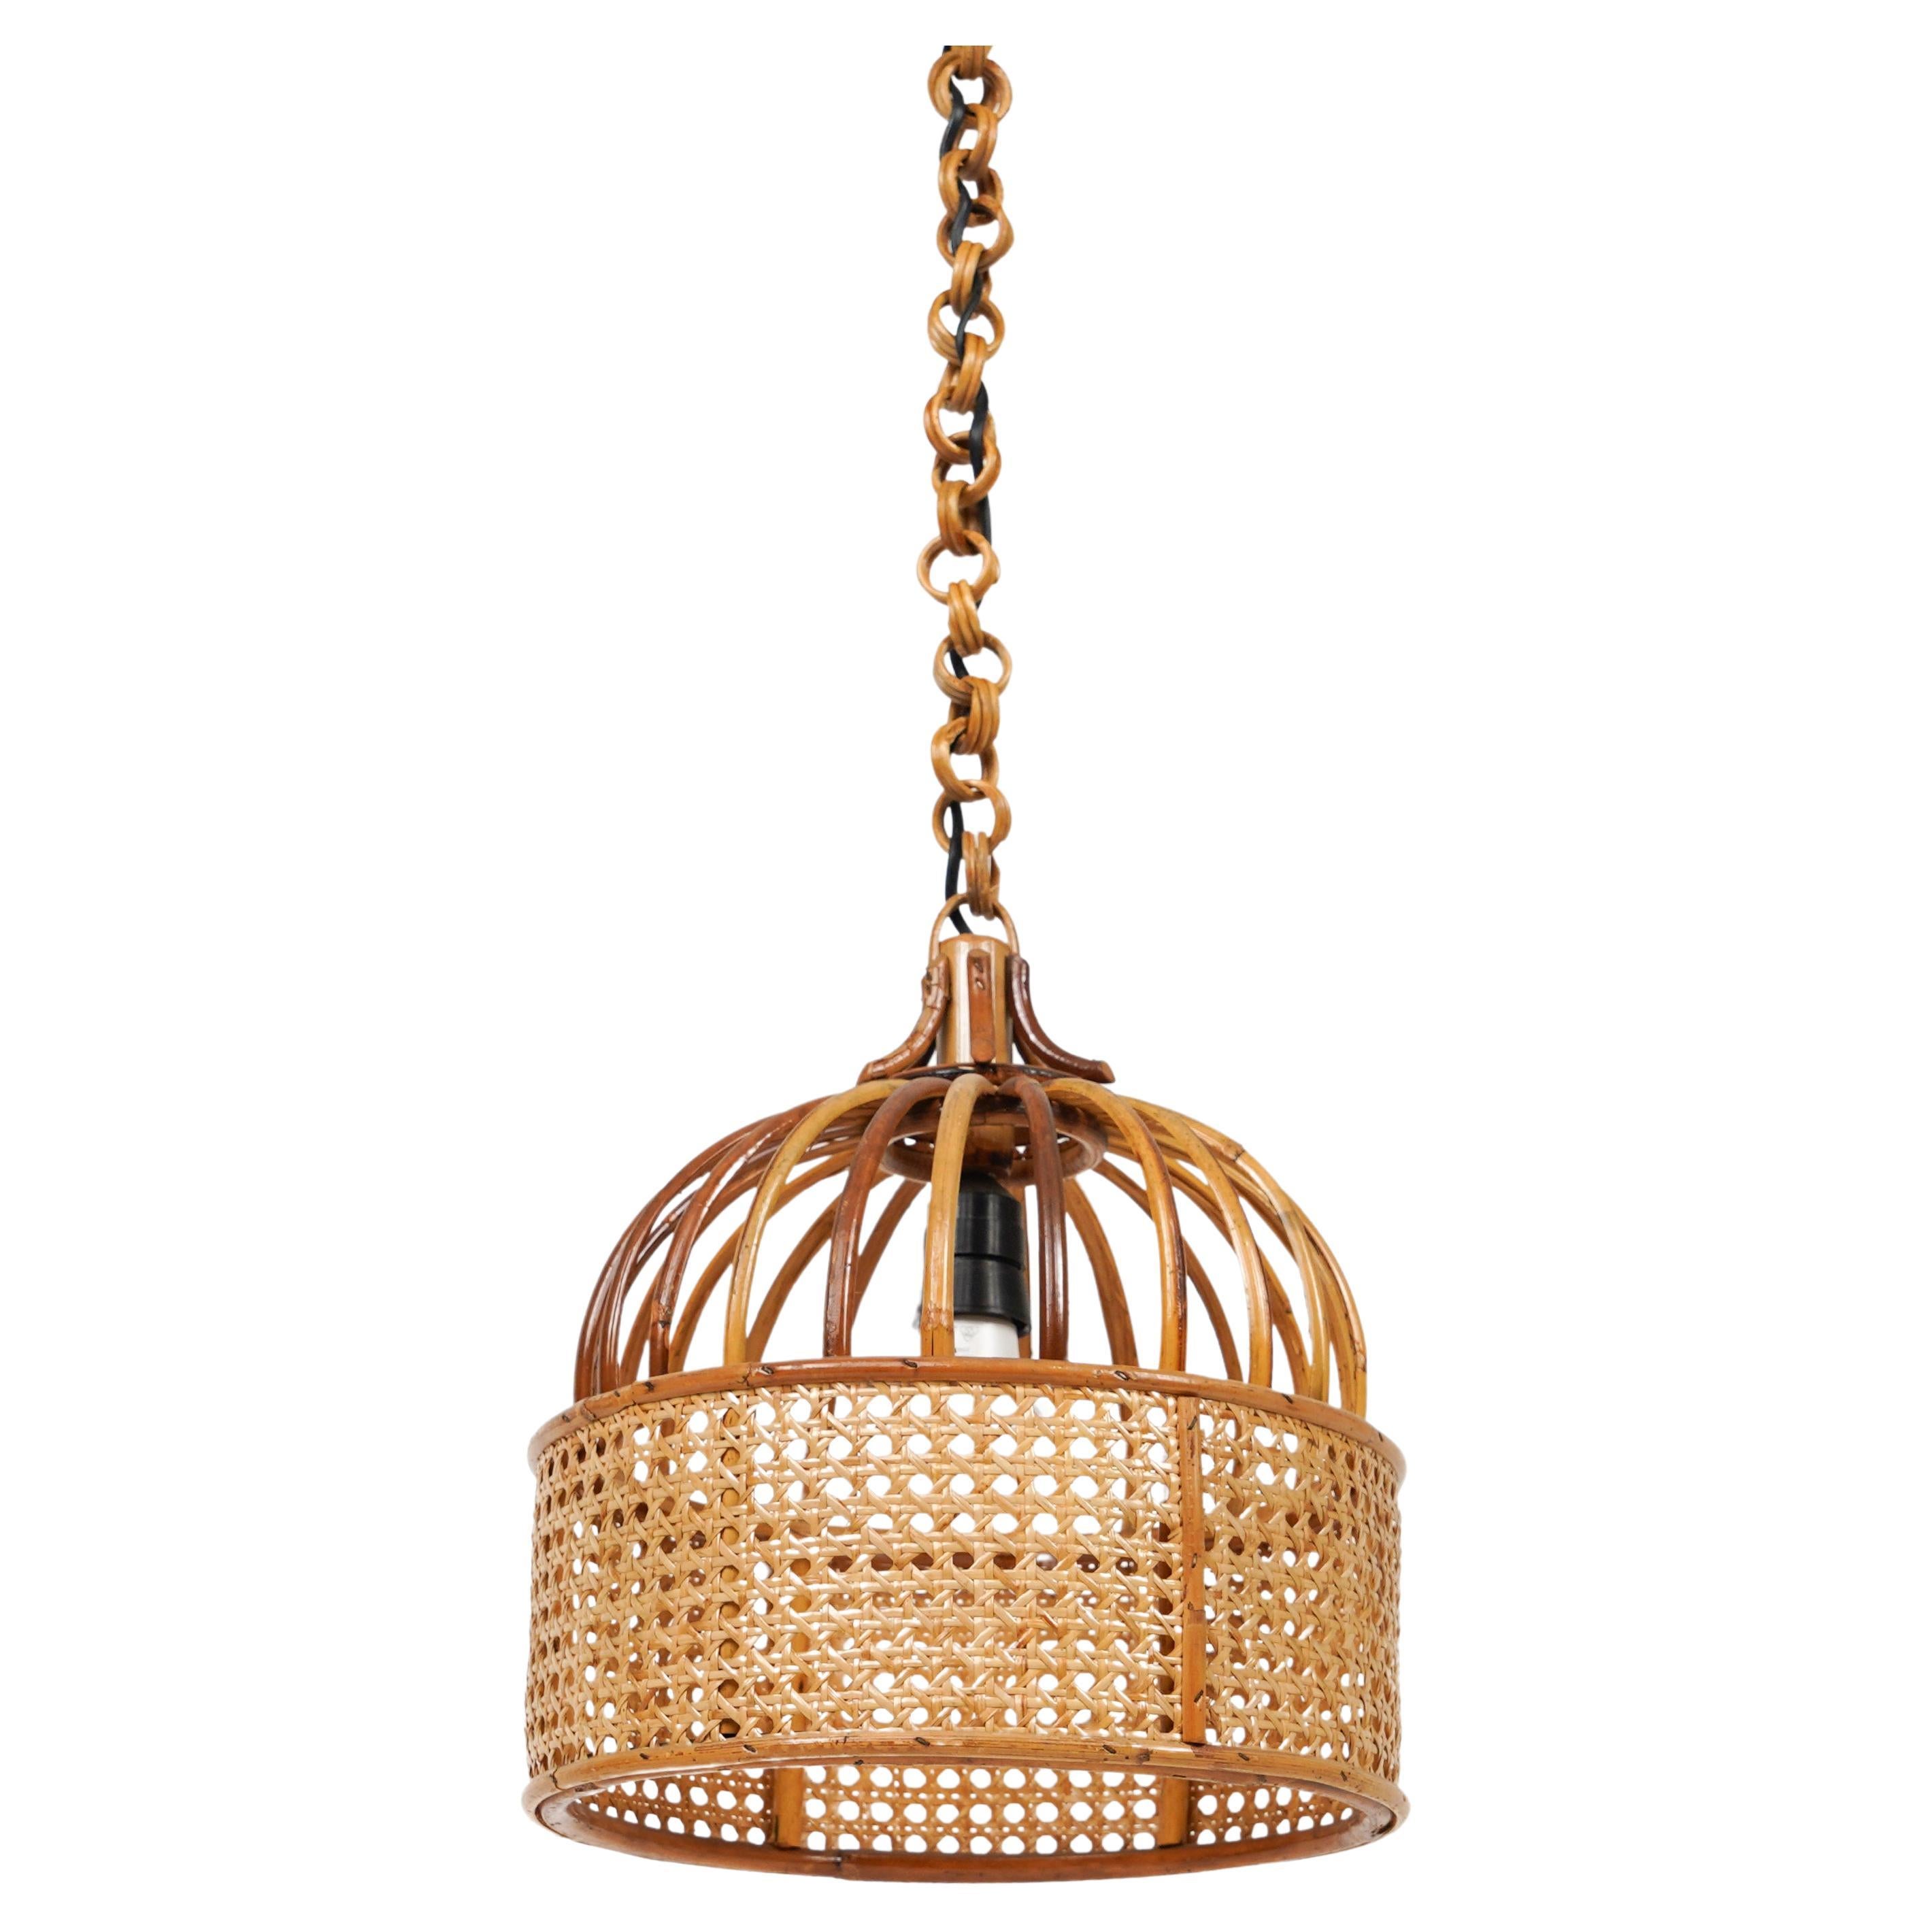 Midcentury French Riviera Rattan and Wicker Chandelier, Italy 1970s For Sale